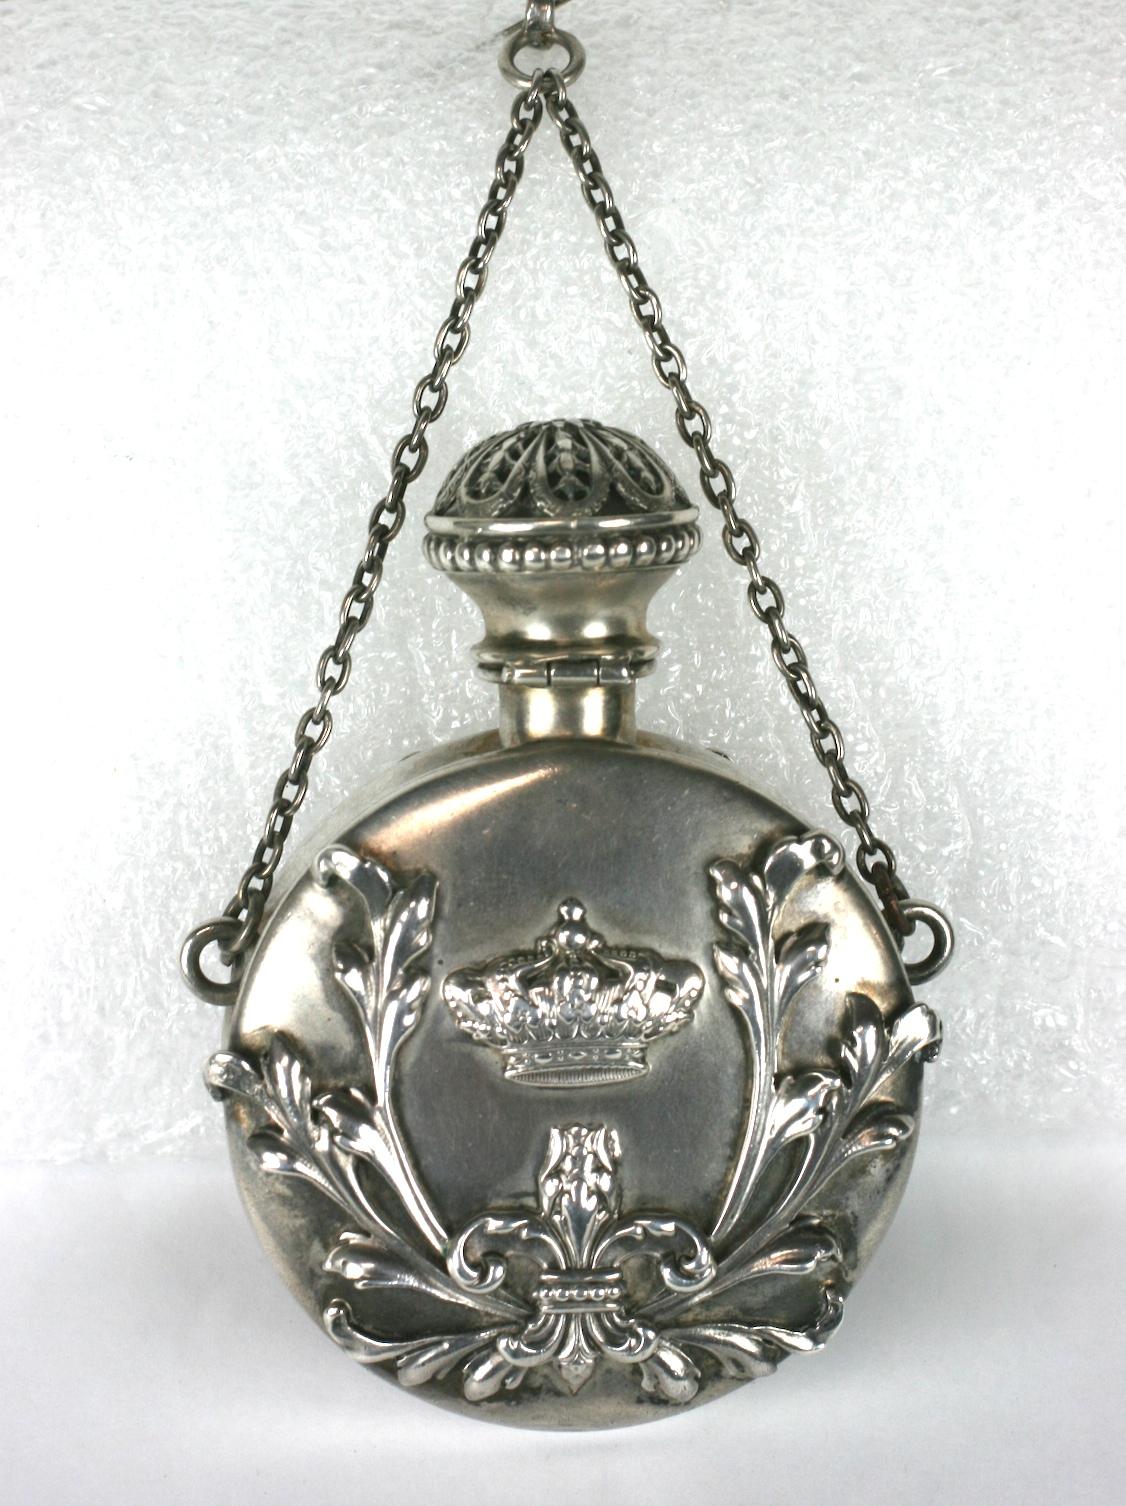 Shiebler sterling Victorian perfume flask pendant made originally for a chatelaine but can be used now as a pendant. It remarkably retains its original sterling stopper which is fitted beautifully.
Ornate Rococo applications with angel, griffin and